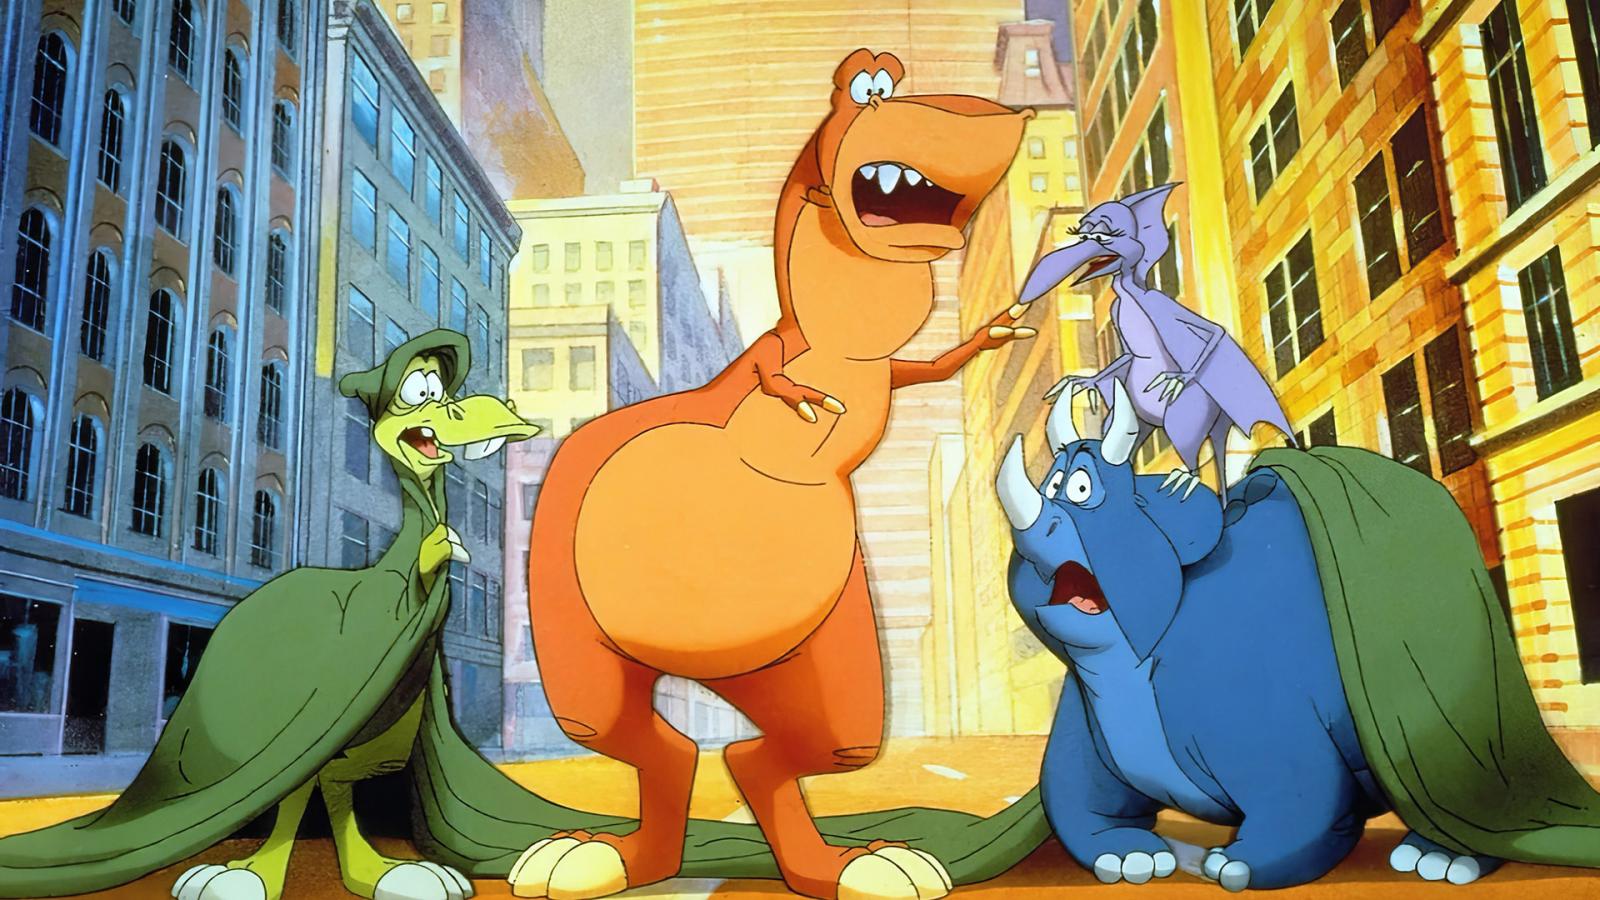 10 Underrated Animated Movies from the '90s You've Missed - image 8